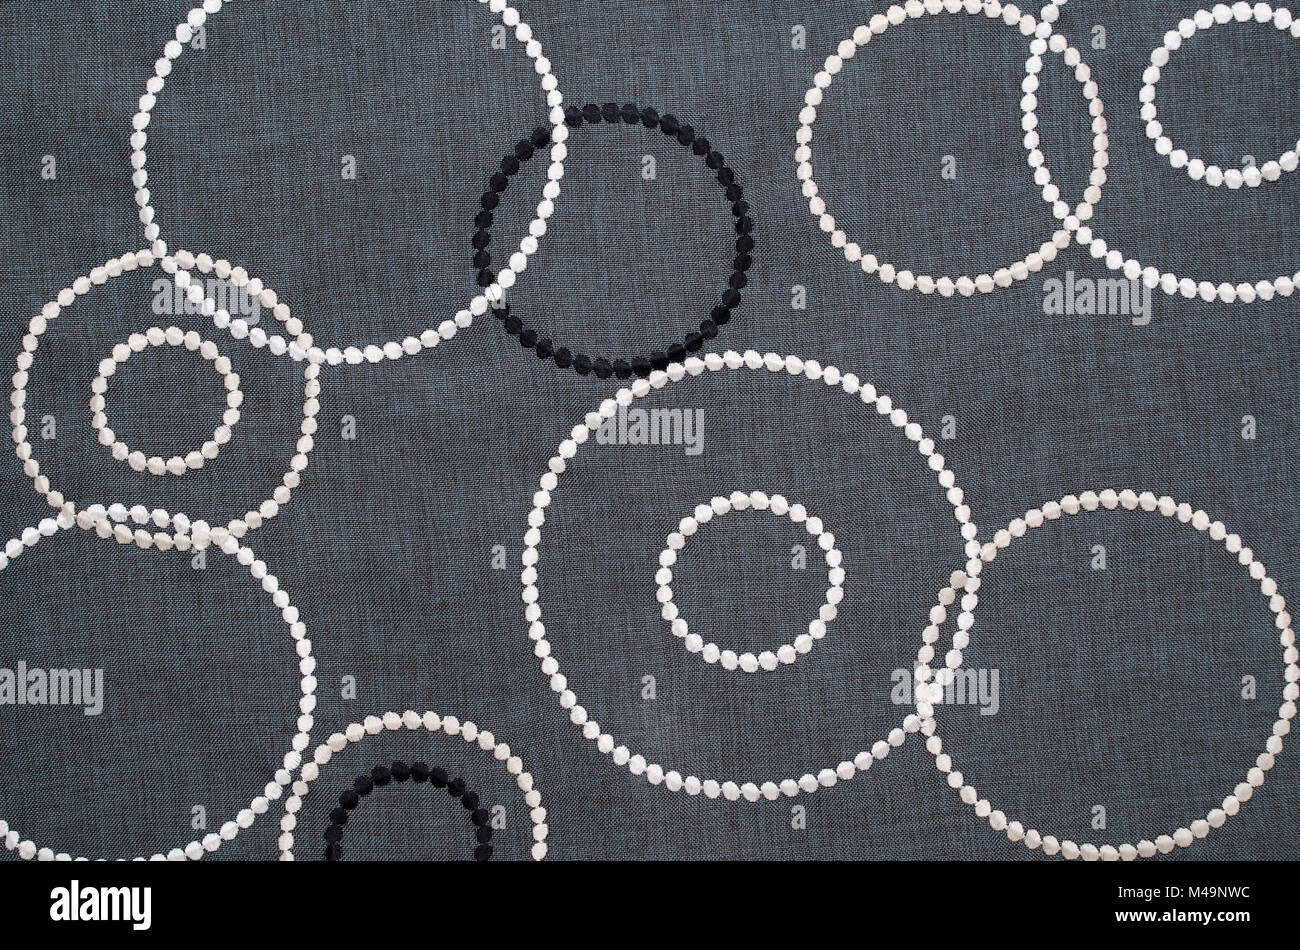 Kitchen gray table cloth texture fabric with white circles Stock Photo